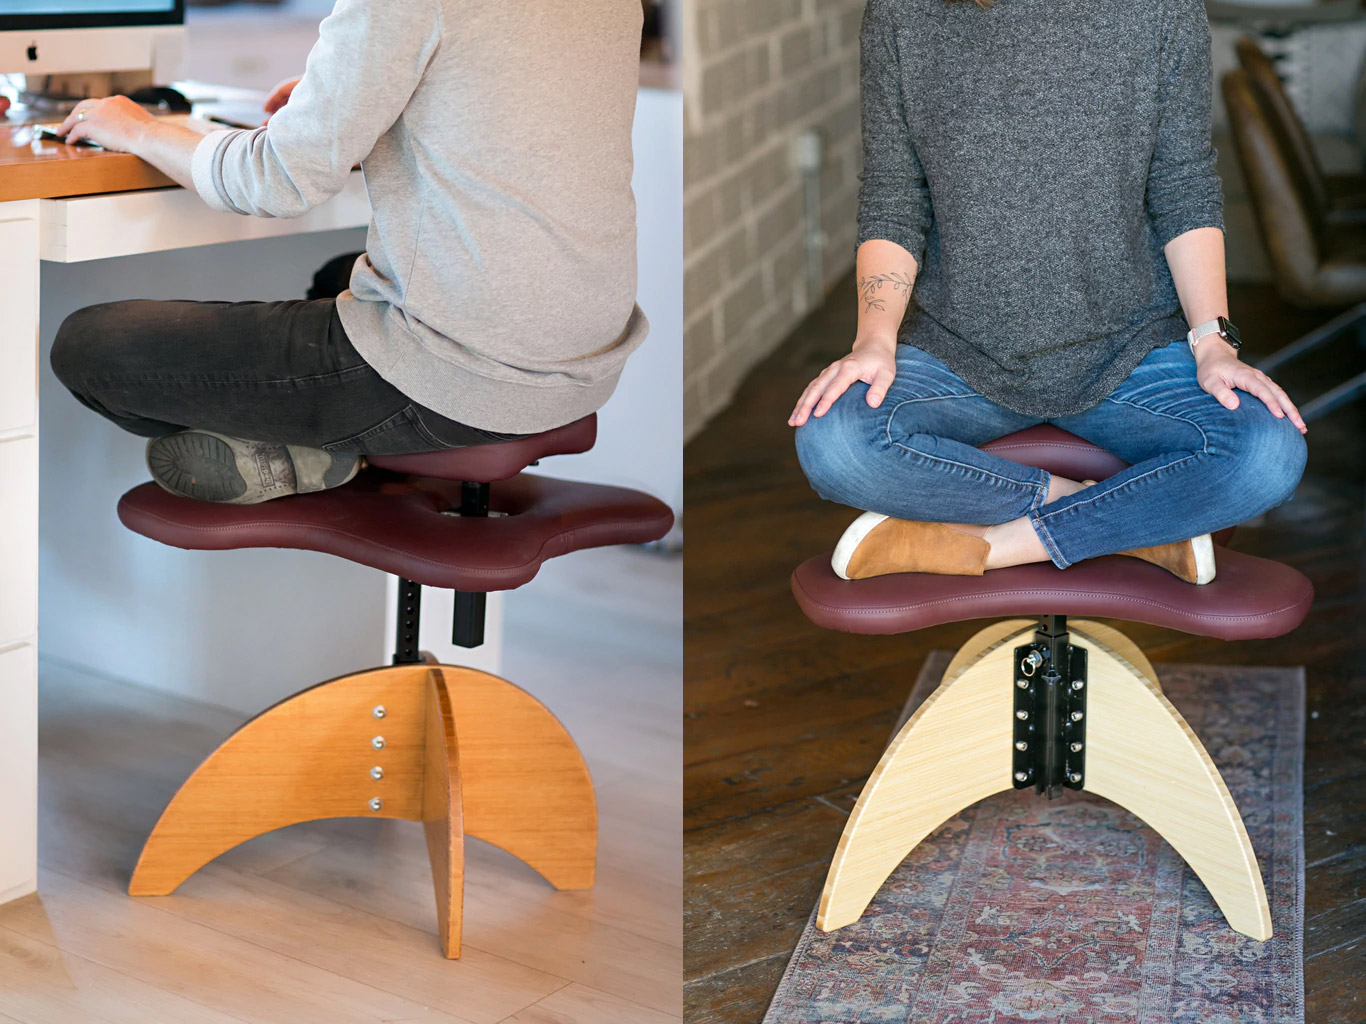 There's Now an Office Chair That Lets You Sit Cross-Legged, Or in Any